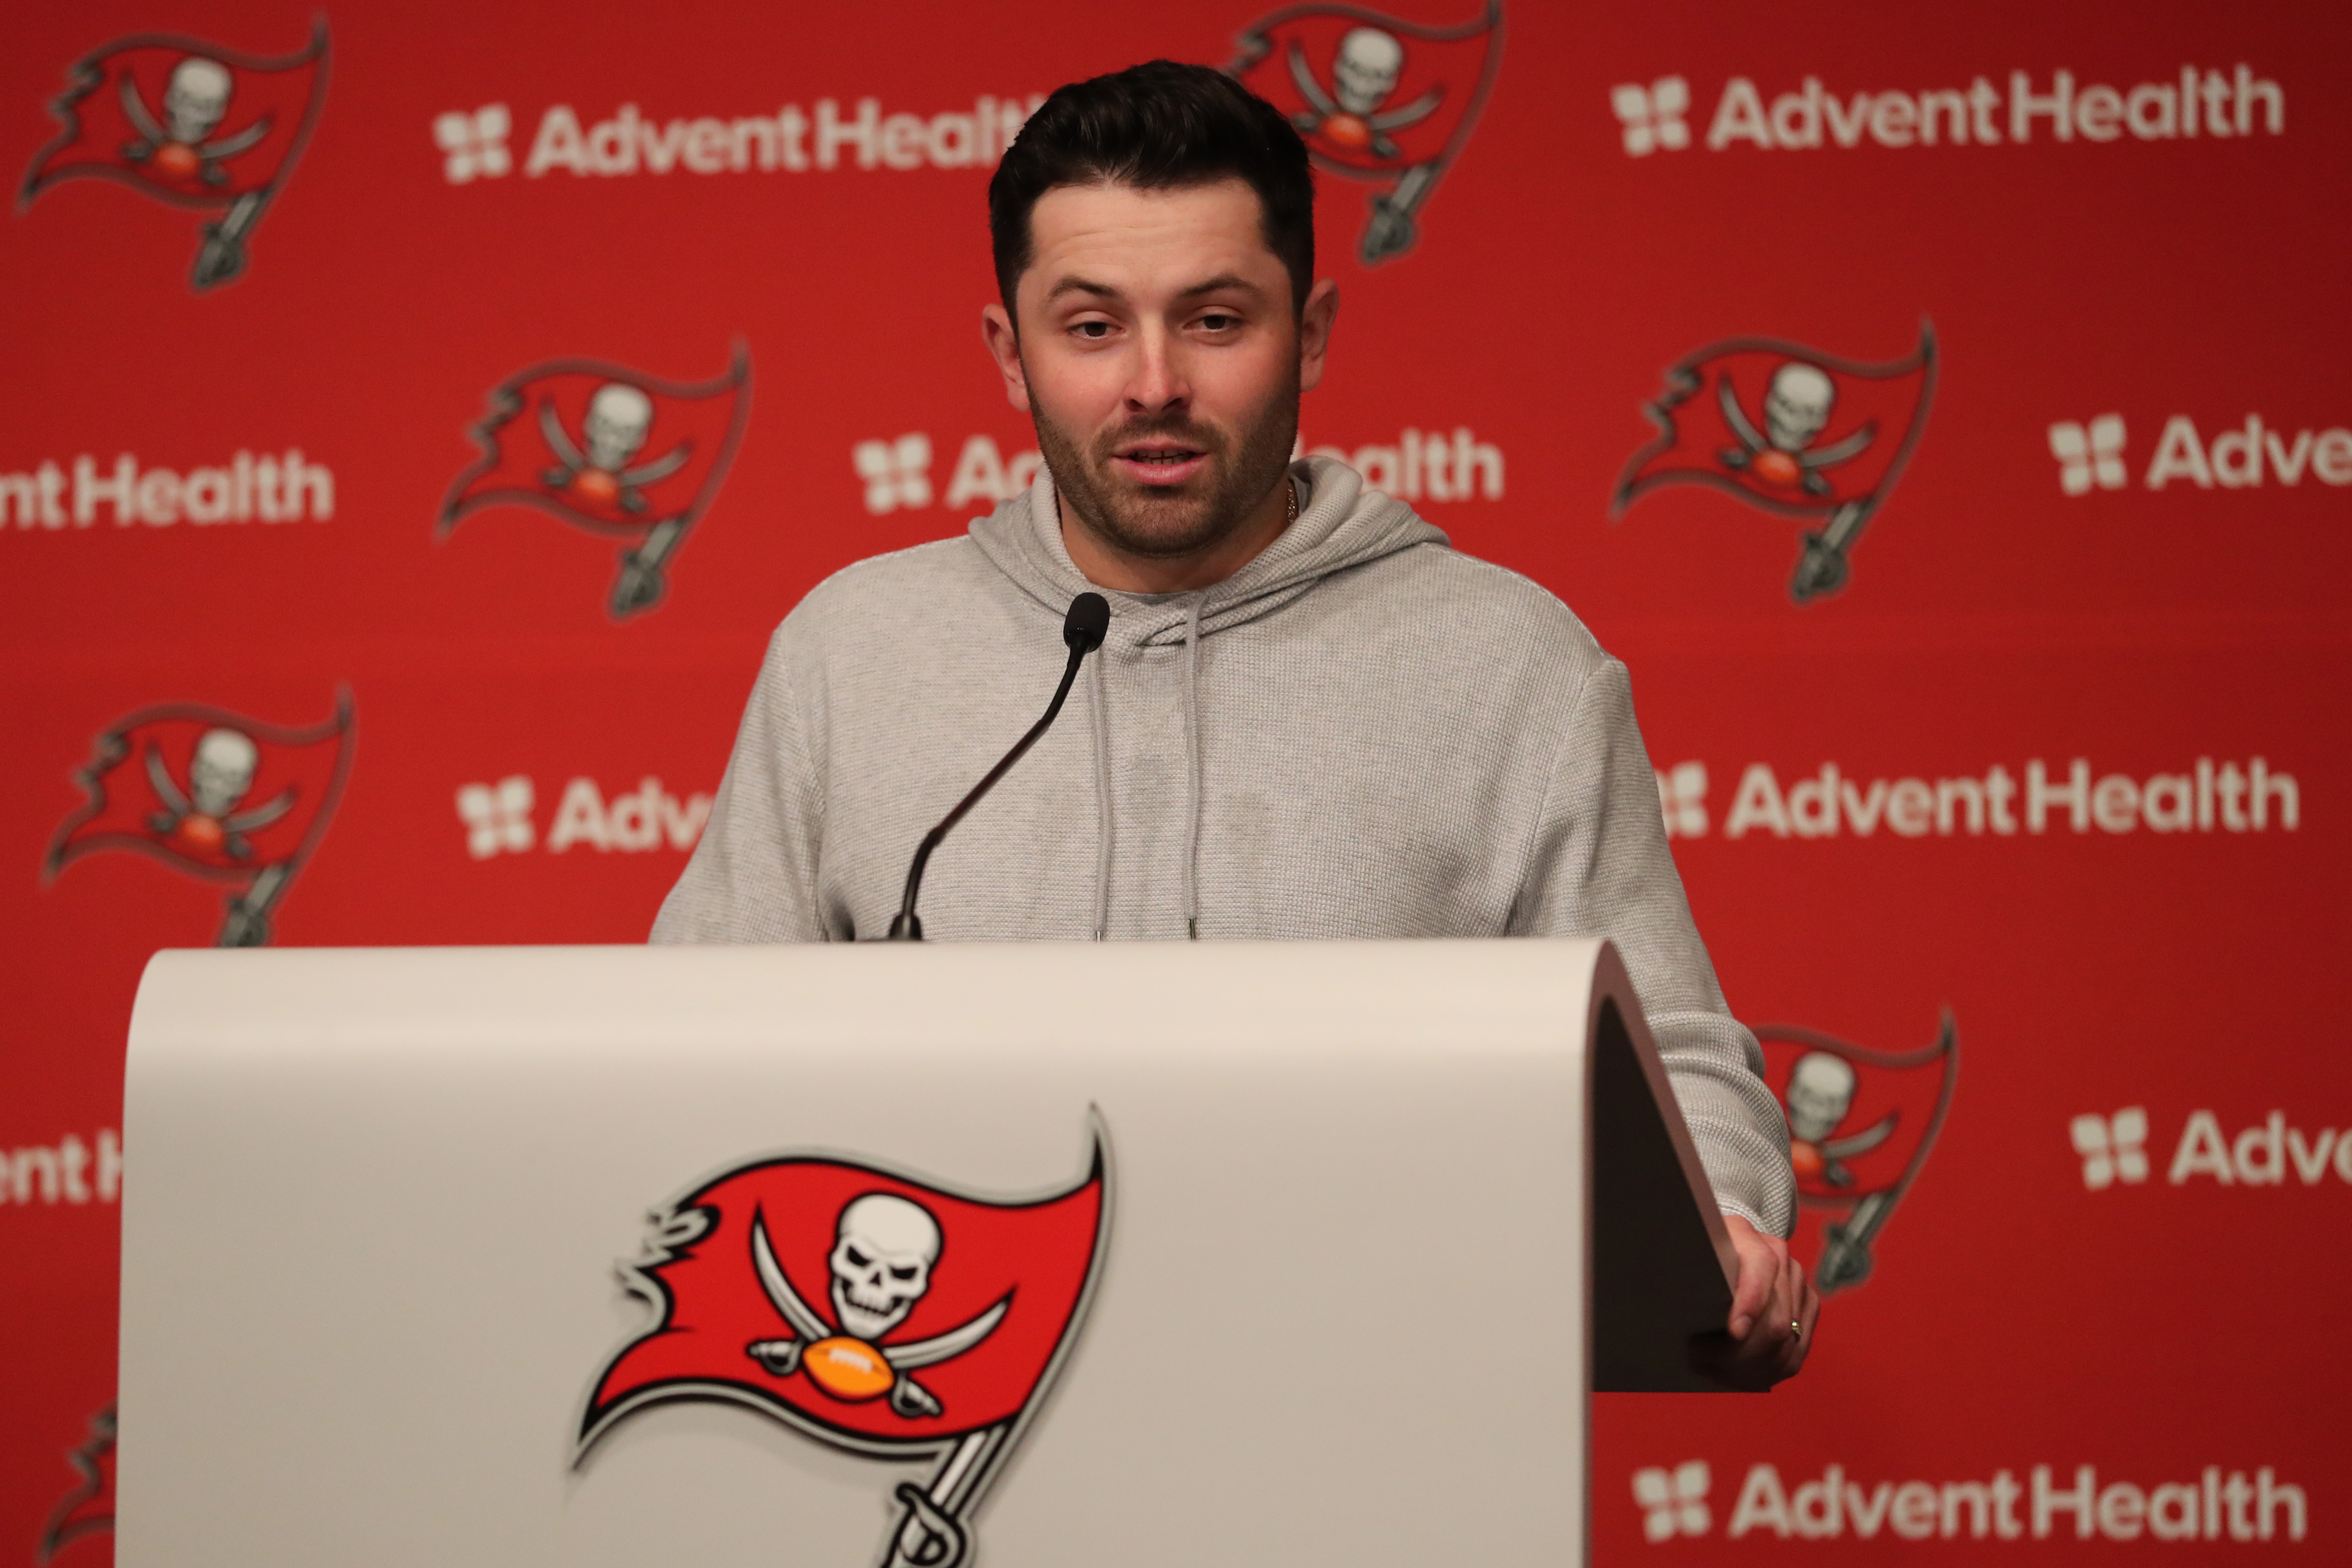 Quarterback Baker Mayfield of the Tampa Bay Buccaneers speaks at the press conference at the AdventHealth Training Center in Tampa, Florida, March 20, 2023. /CFP